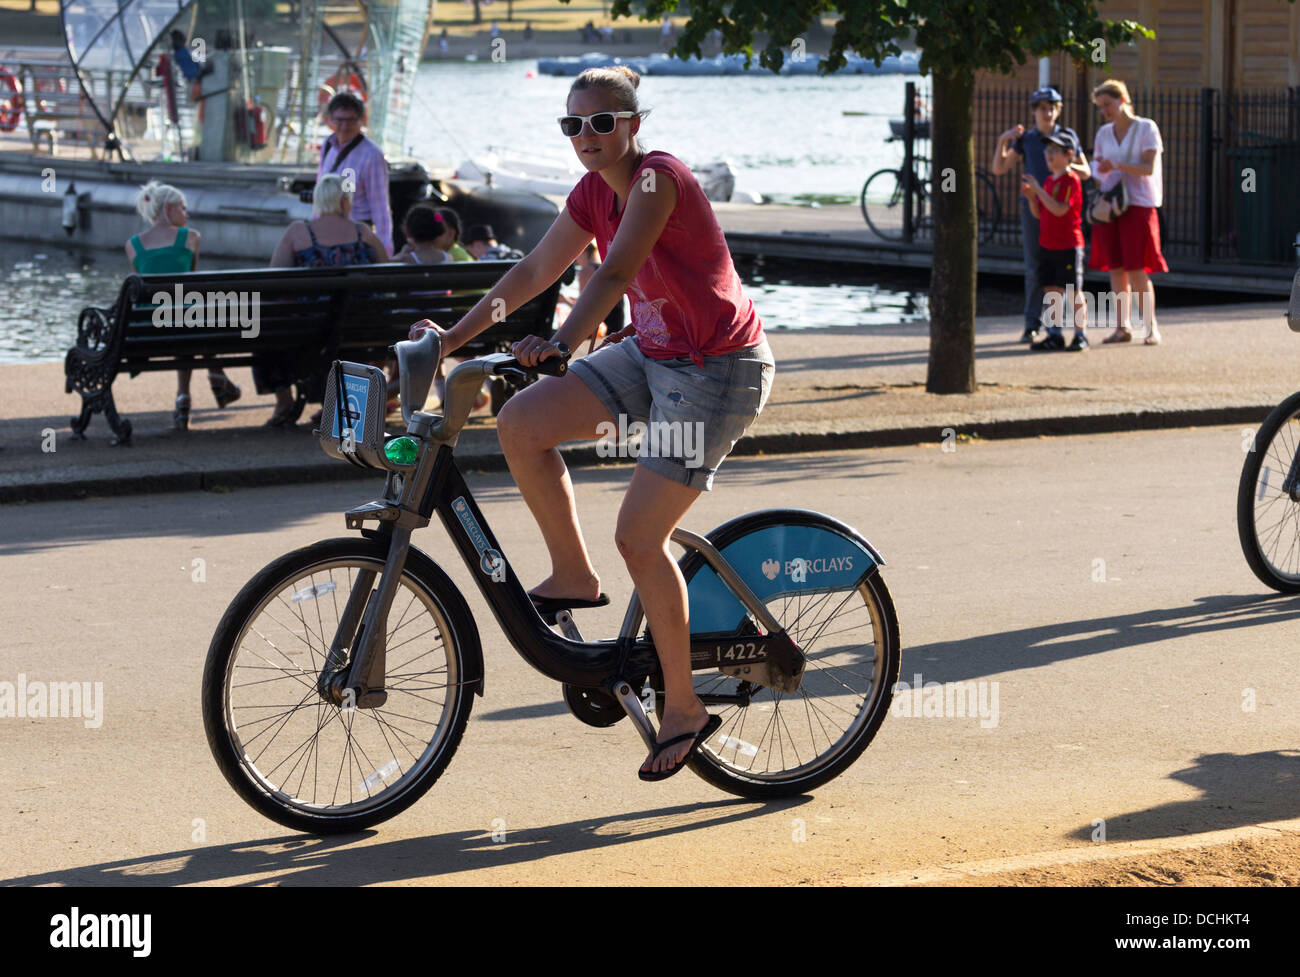 Women riding hired Cycle - Hyde Park - London [Barclays bike hire scheme] Stock Photo